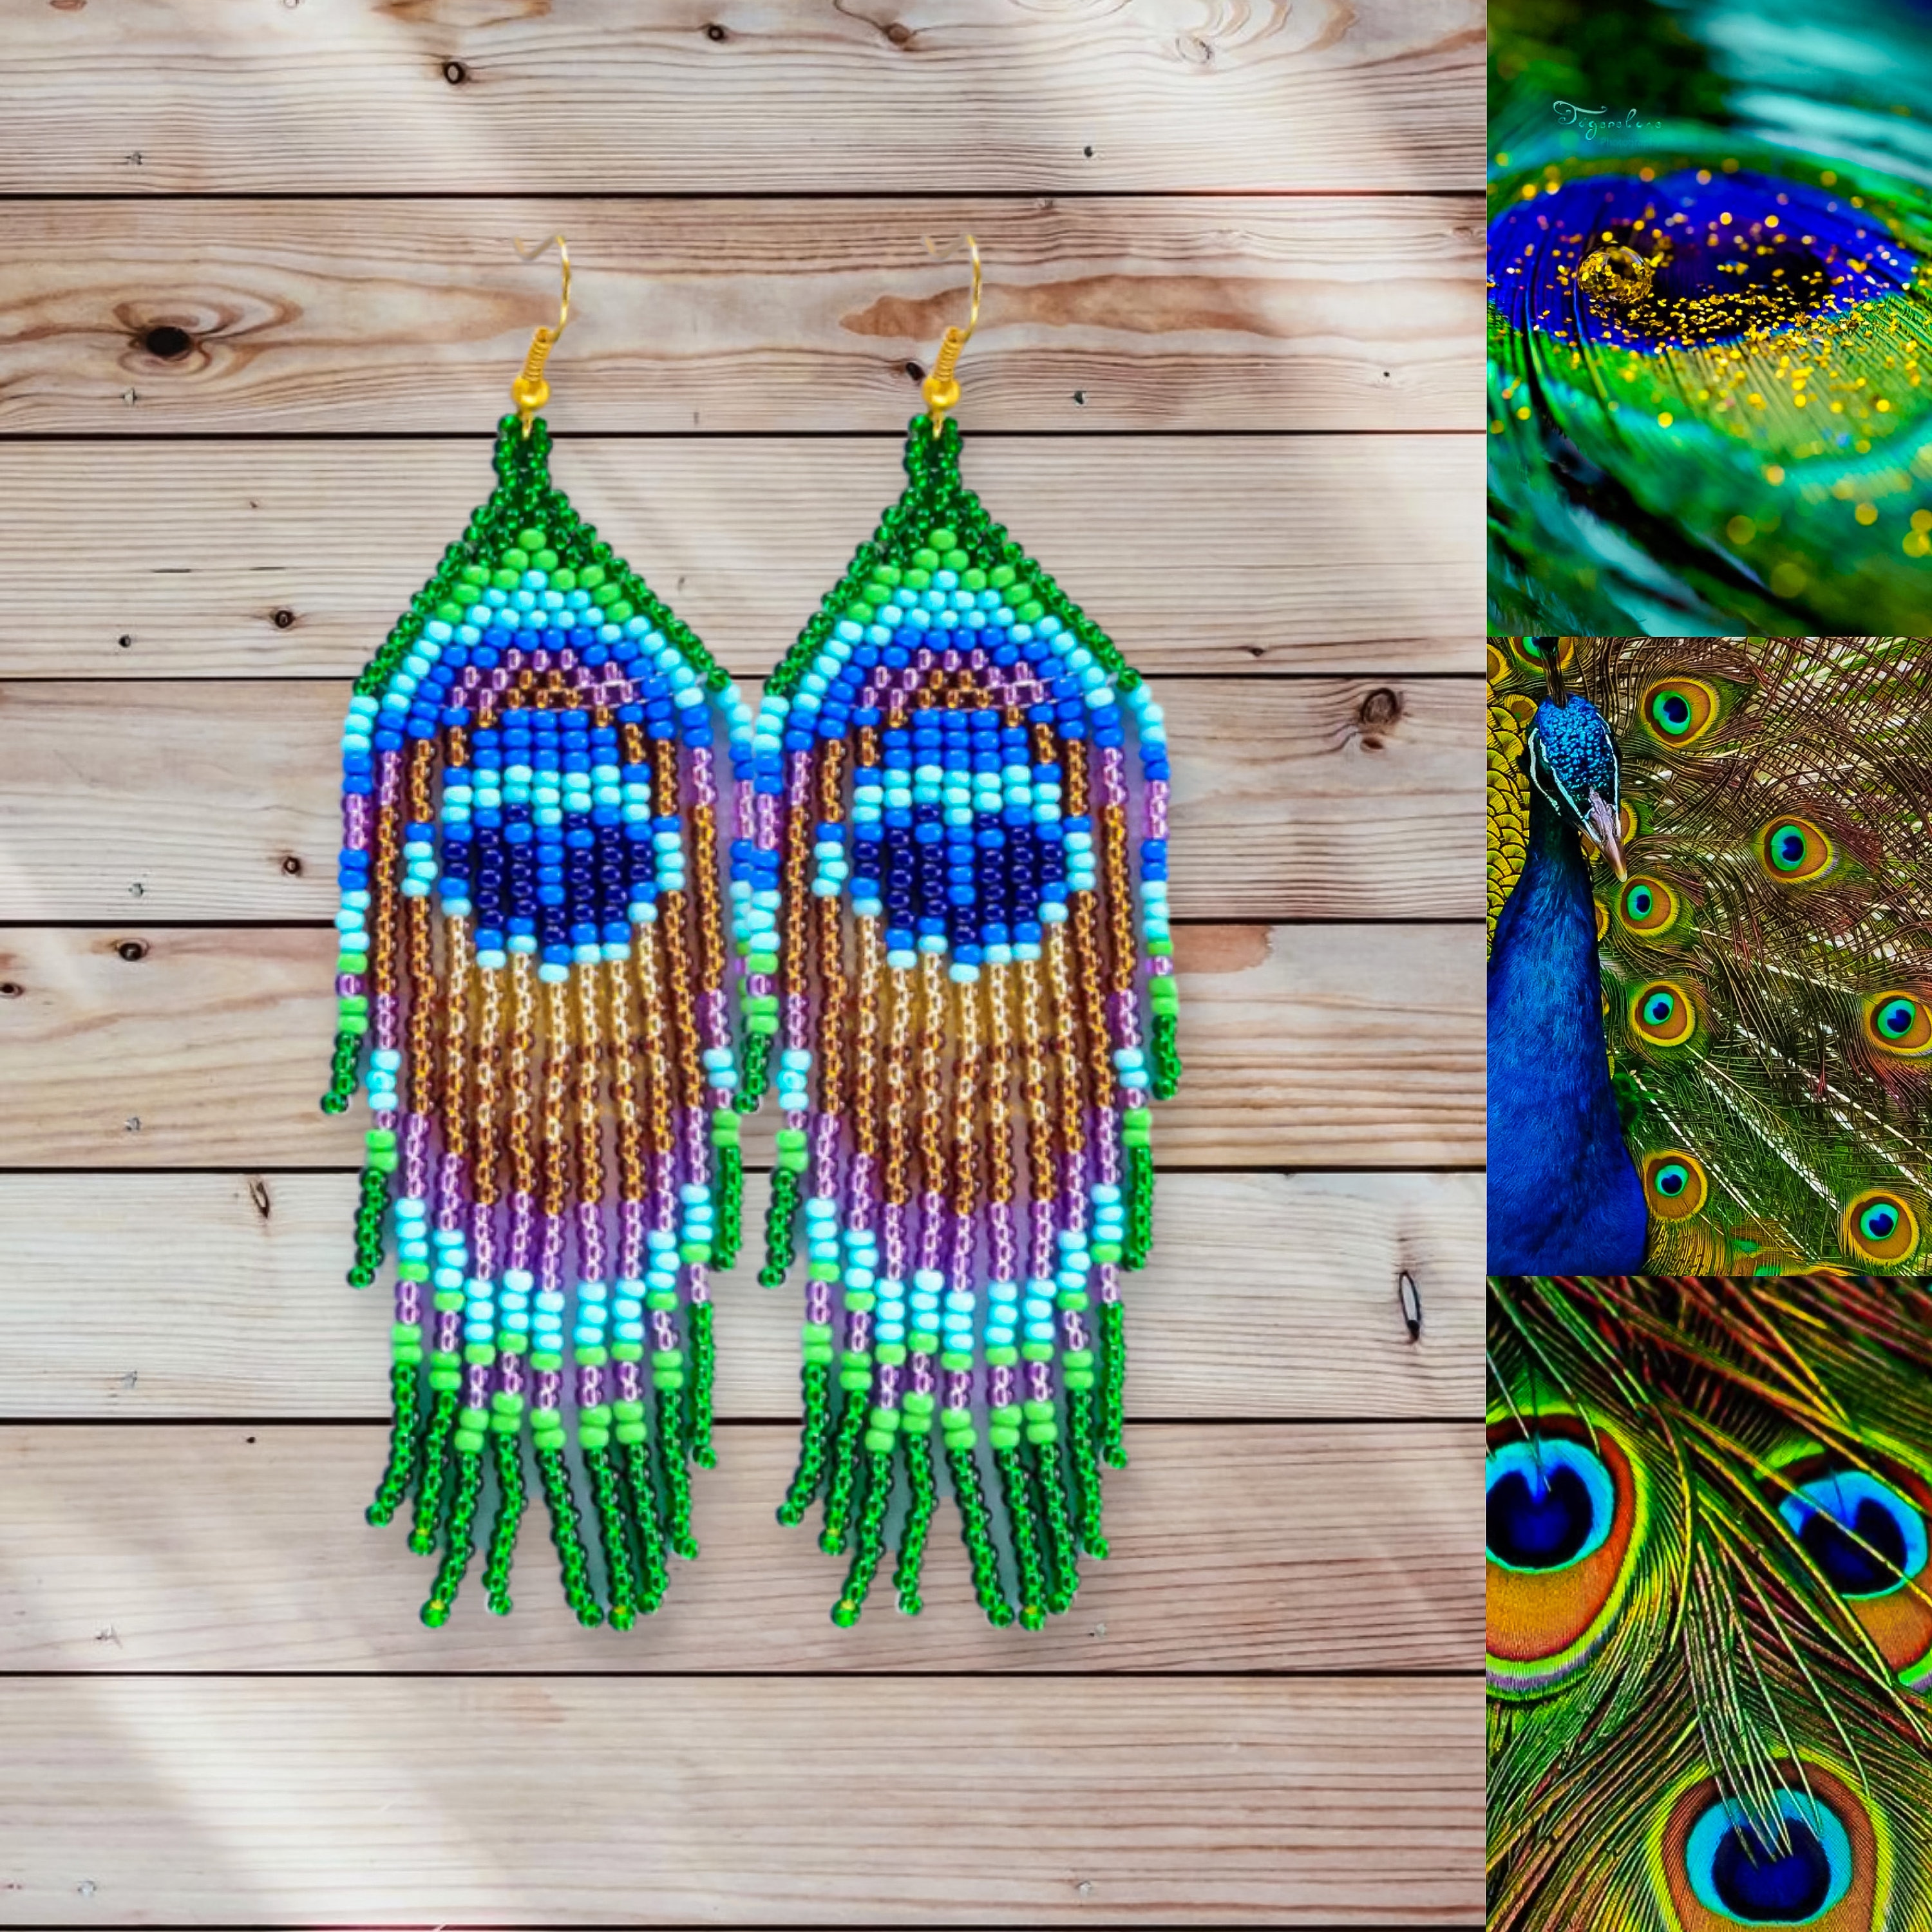 Share more than 88 beaded peacock feather earrings best - esthdonghoadian